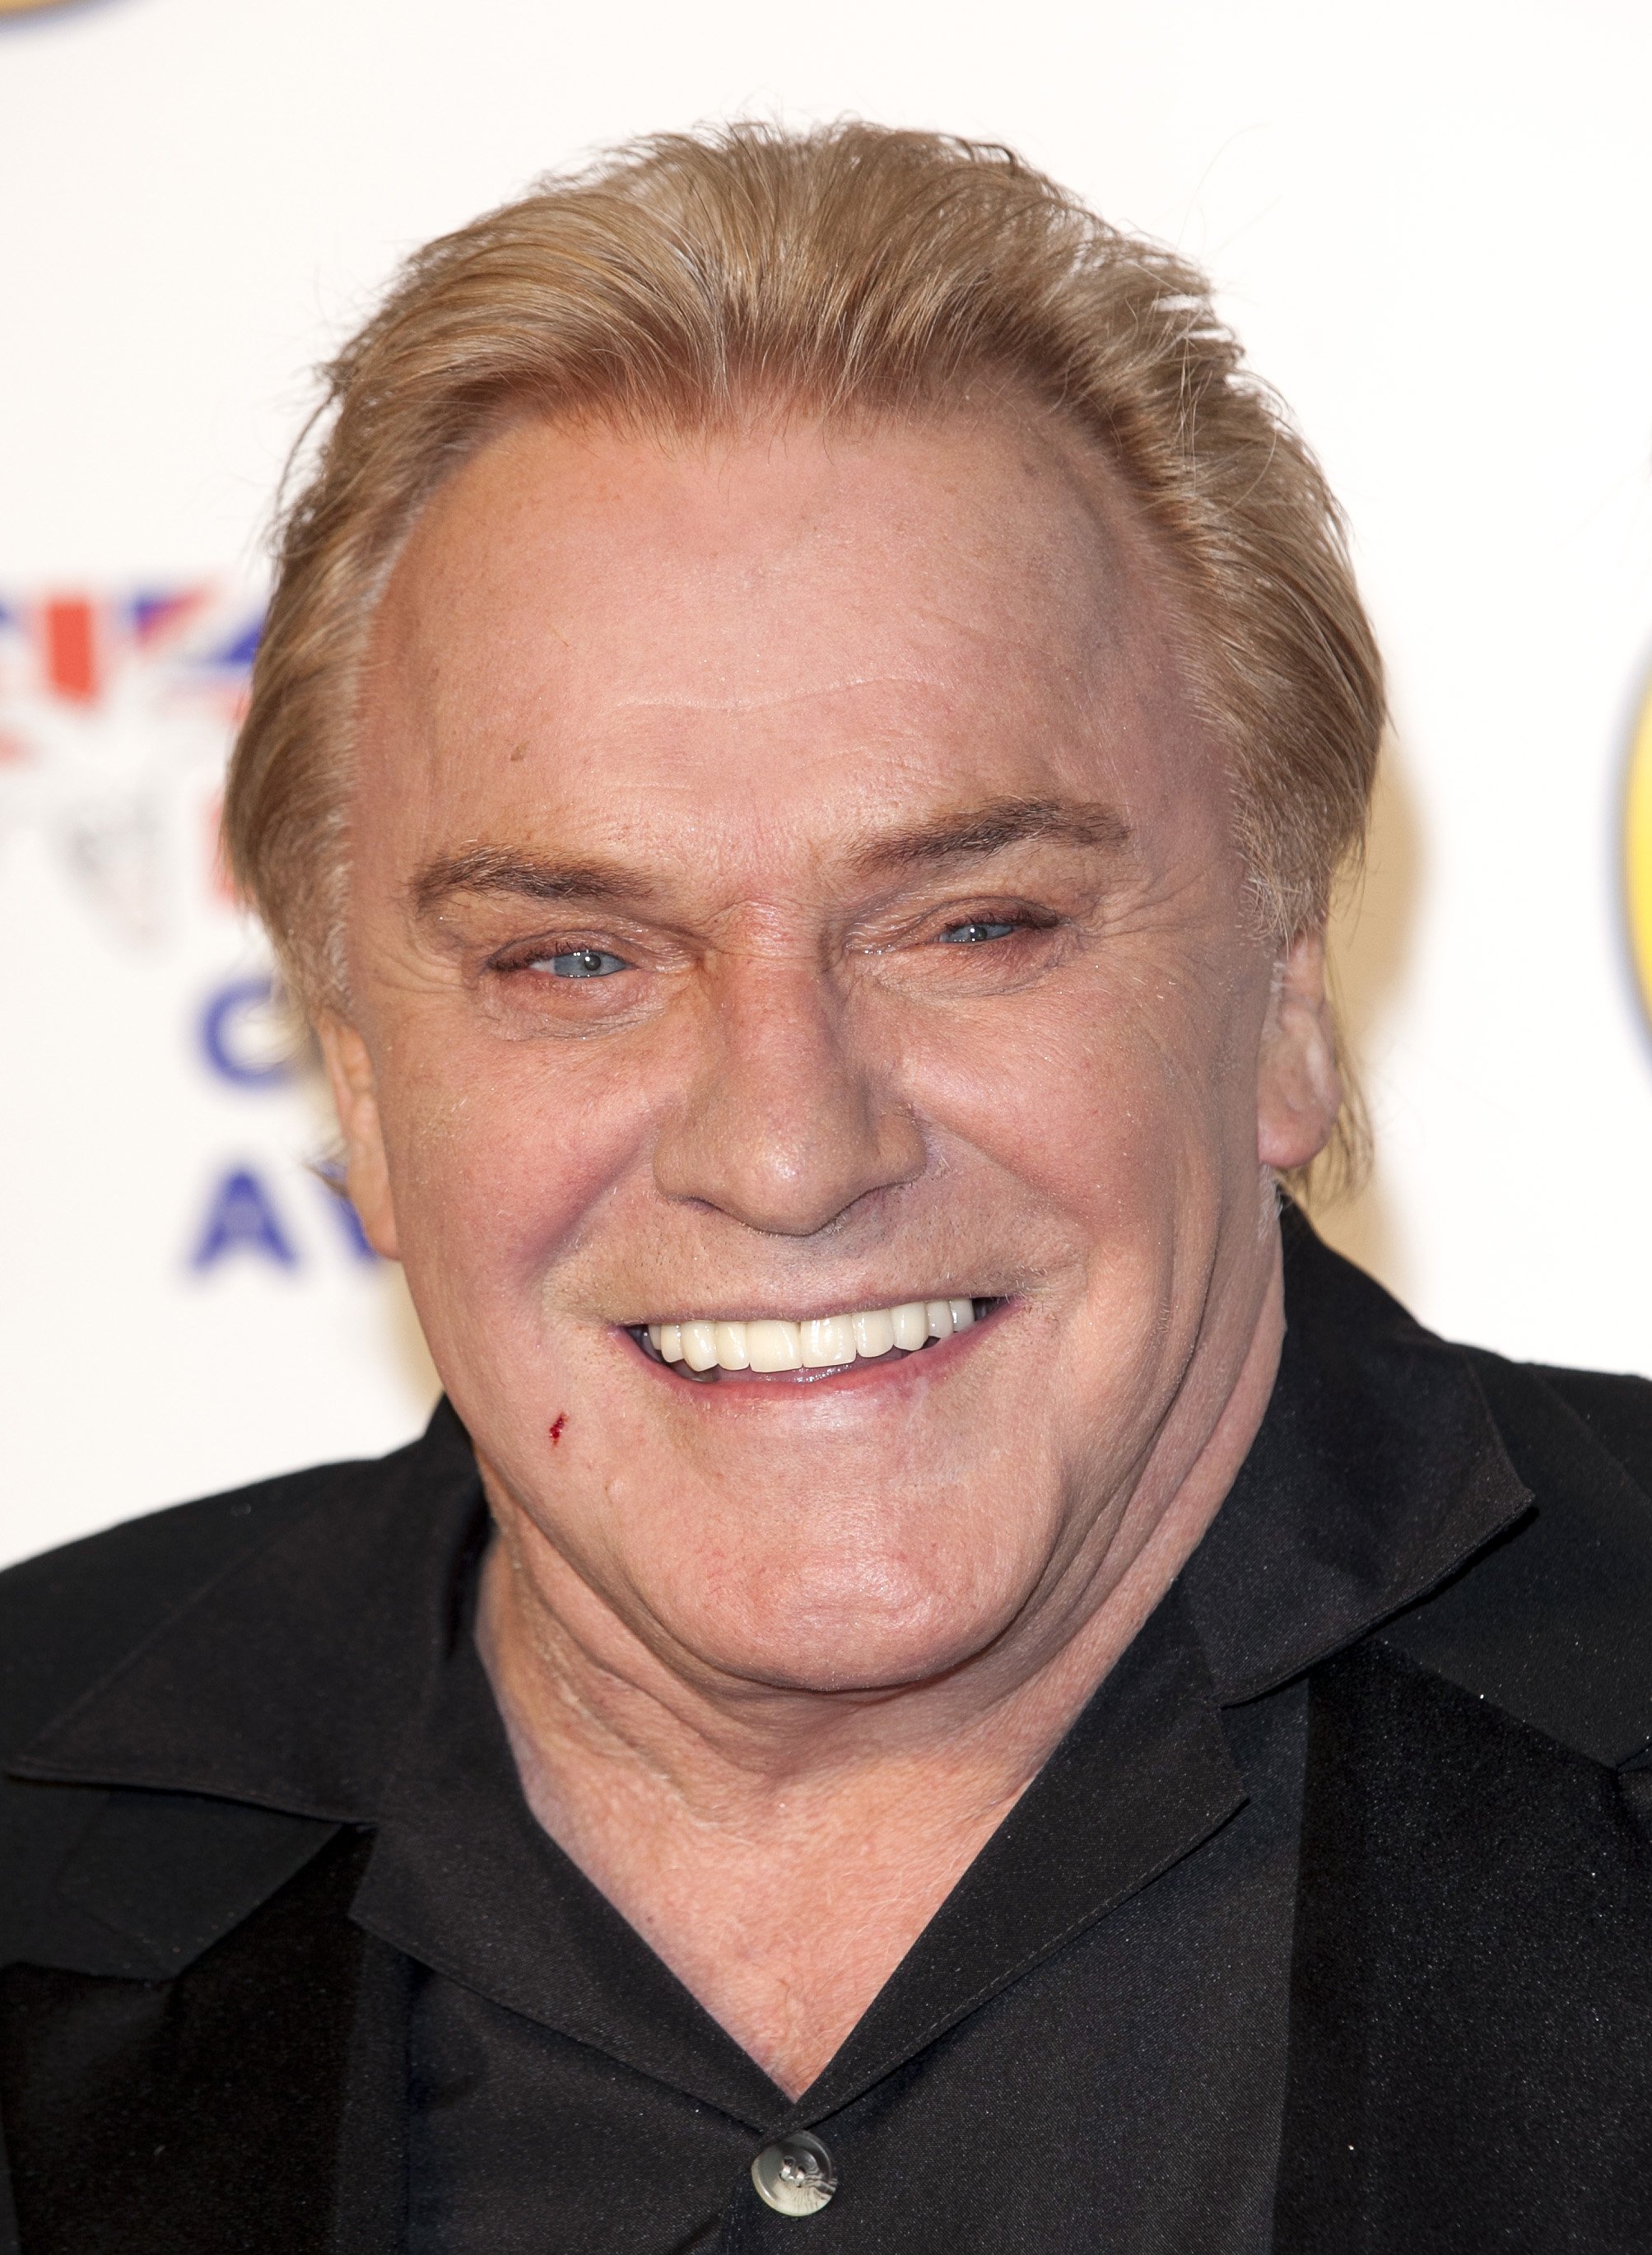 Freddie Starr at the British Comedy Awards At The Fountain Studios In London | Photo: Getty Images